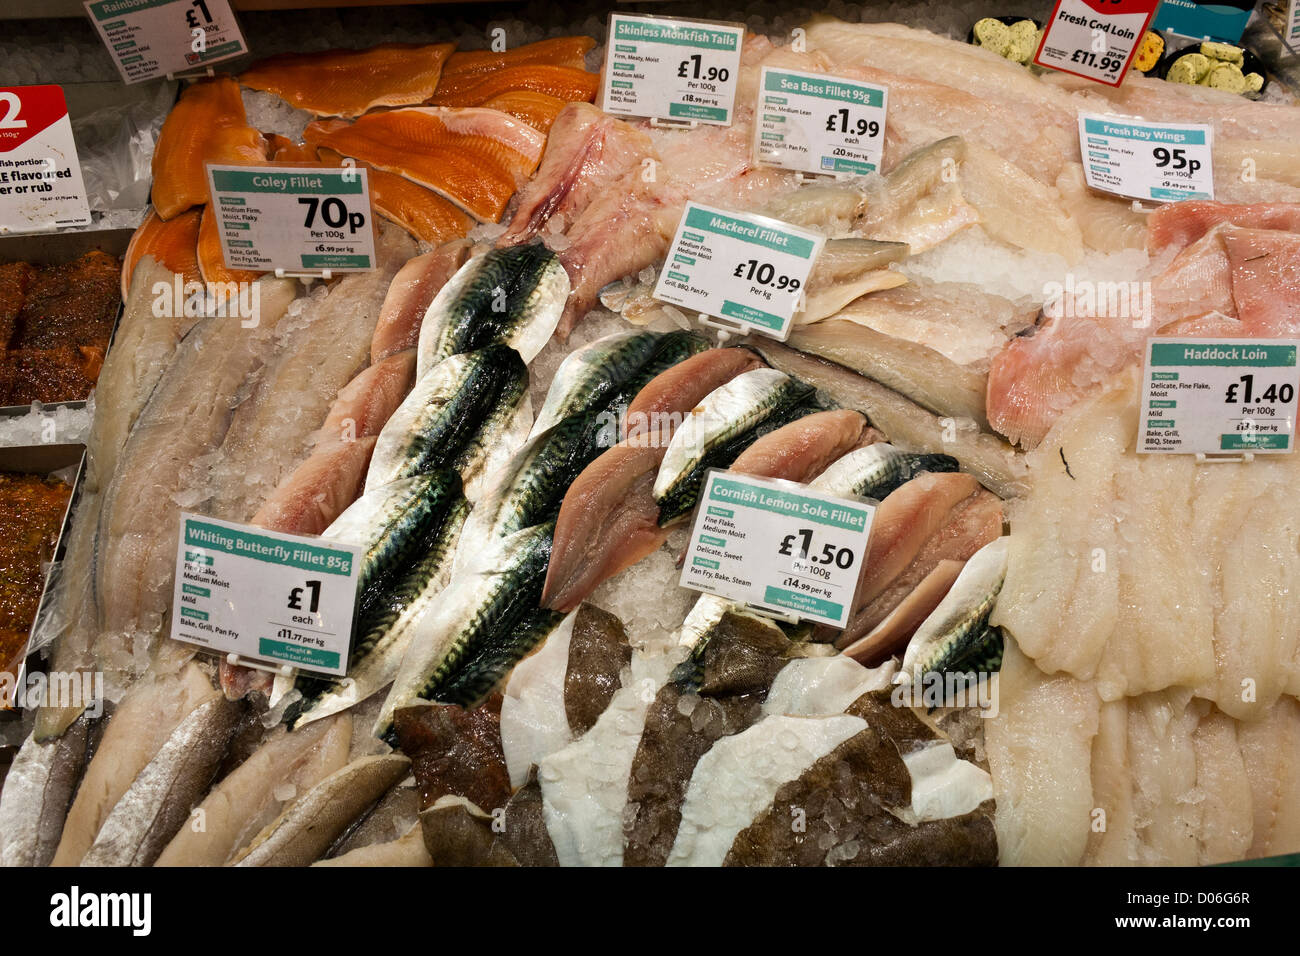 Fresh fish displayed on the fishmongers counter at a Morrison's supermarket Stock Photo